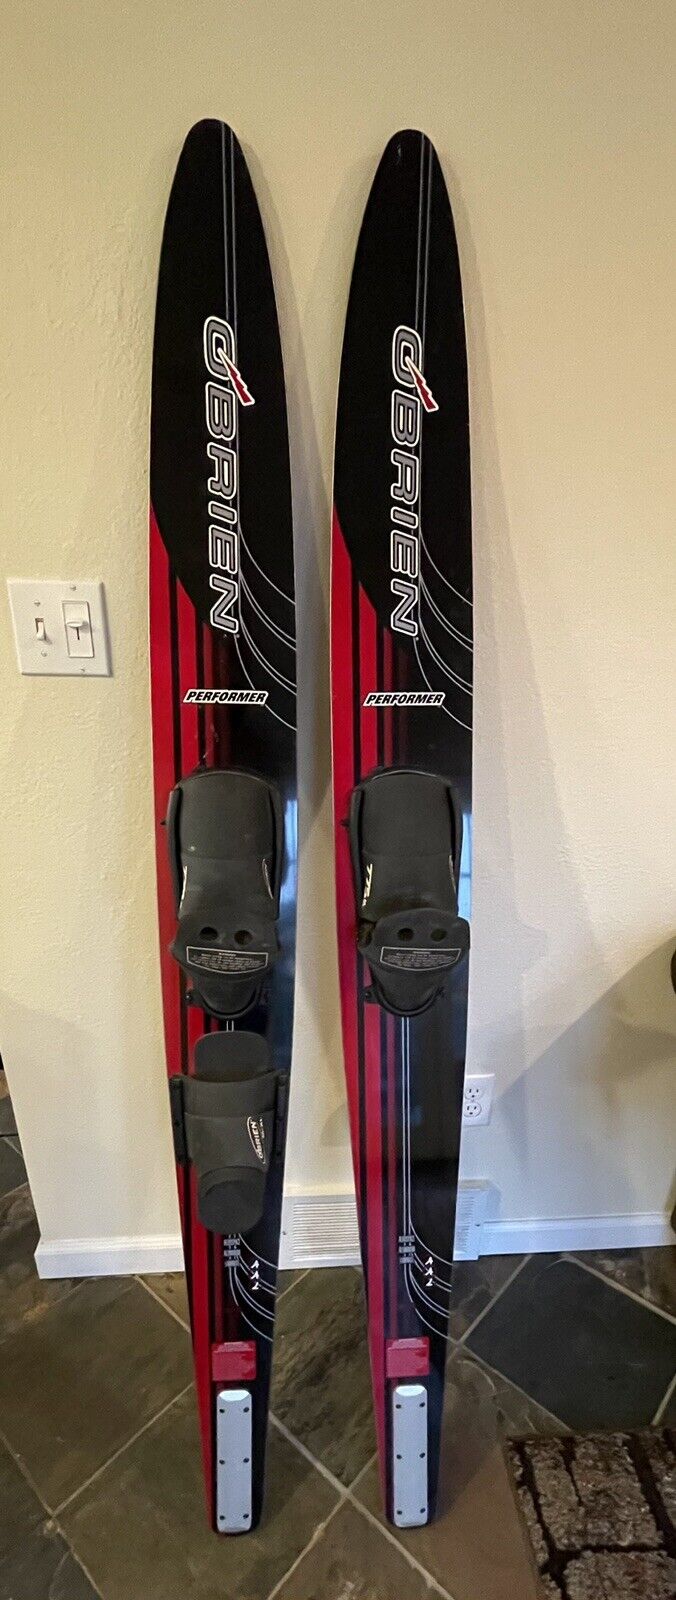 O'brien Performer Combo Water Skis 68 With O’brien Bindings